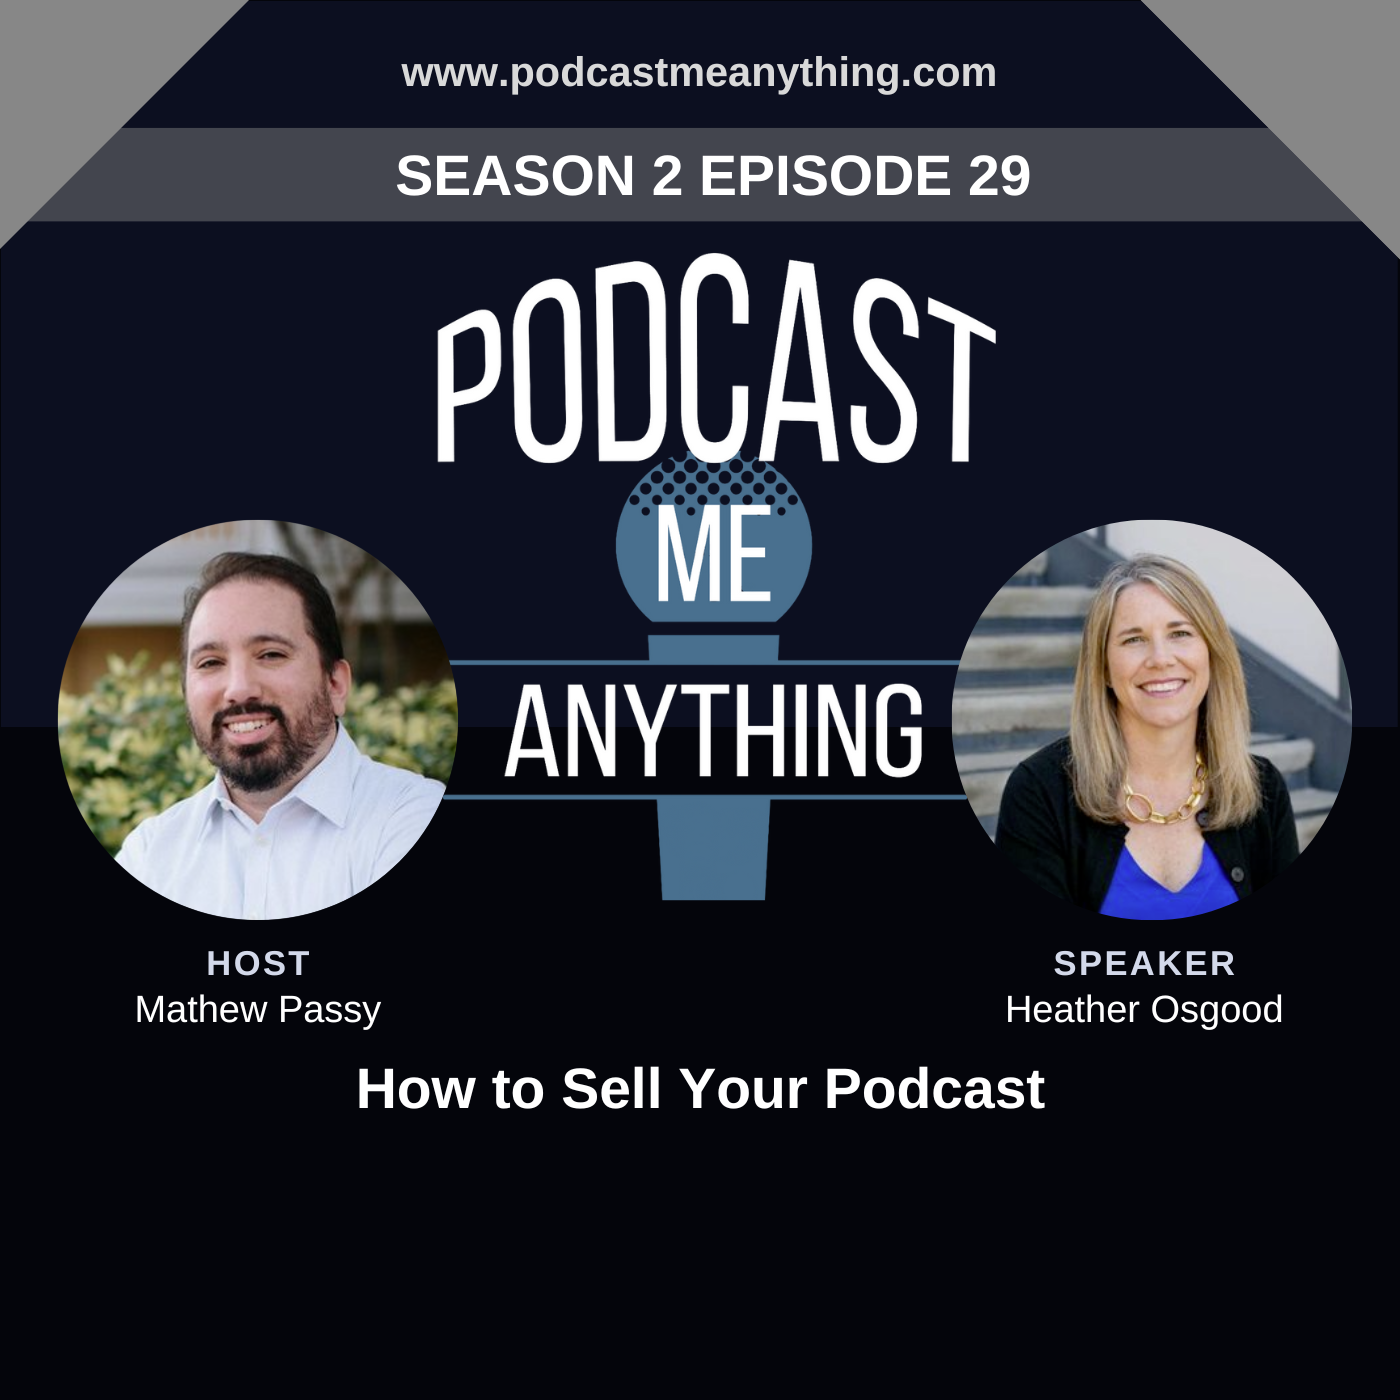 How to Sell Your Podcast with Heather Osgood